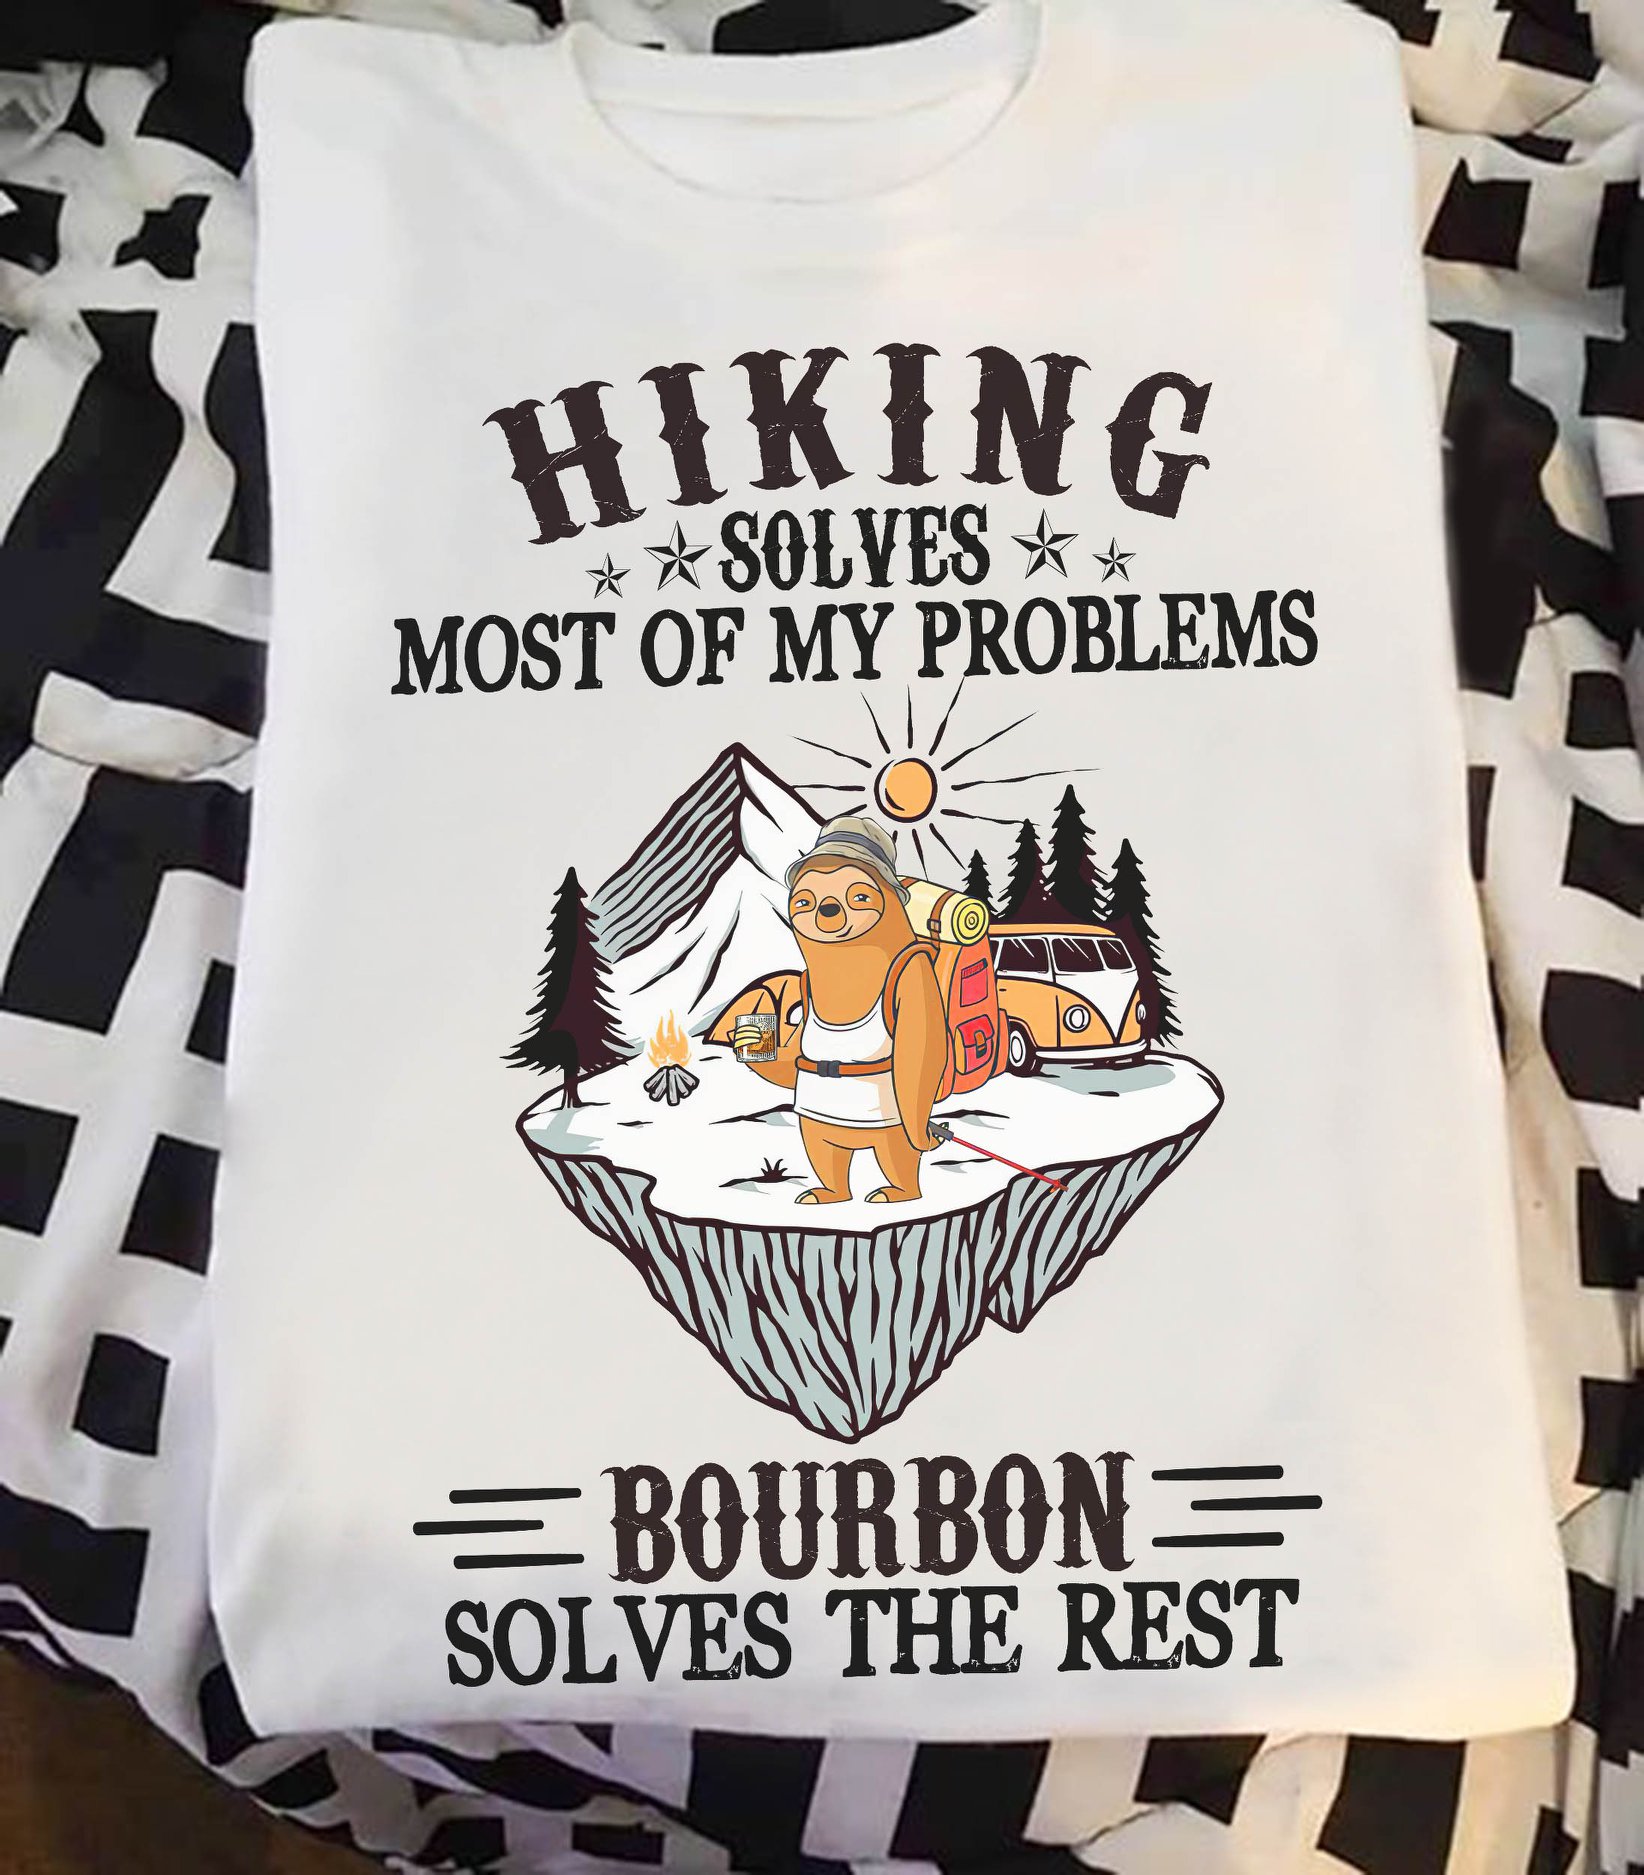 Hiking solves most of my problems Bour bon solves the rest - Love hiking and bourbon